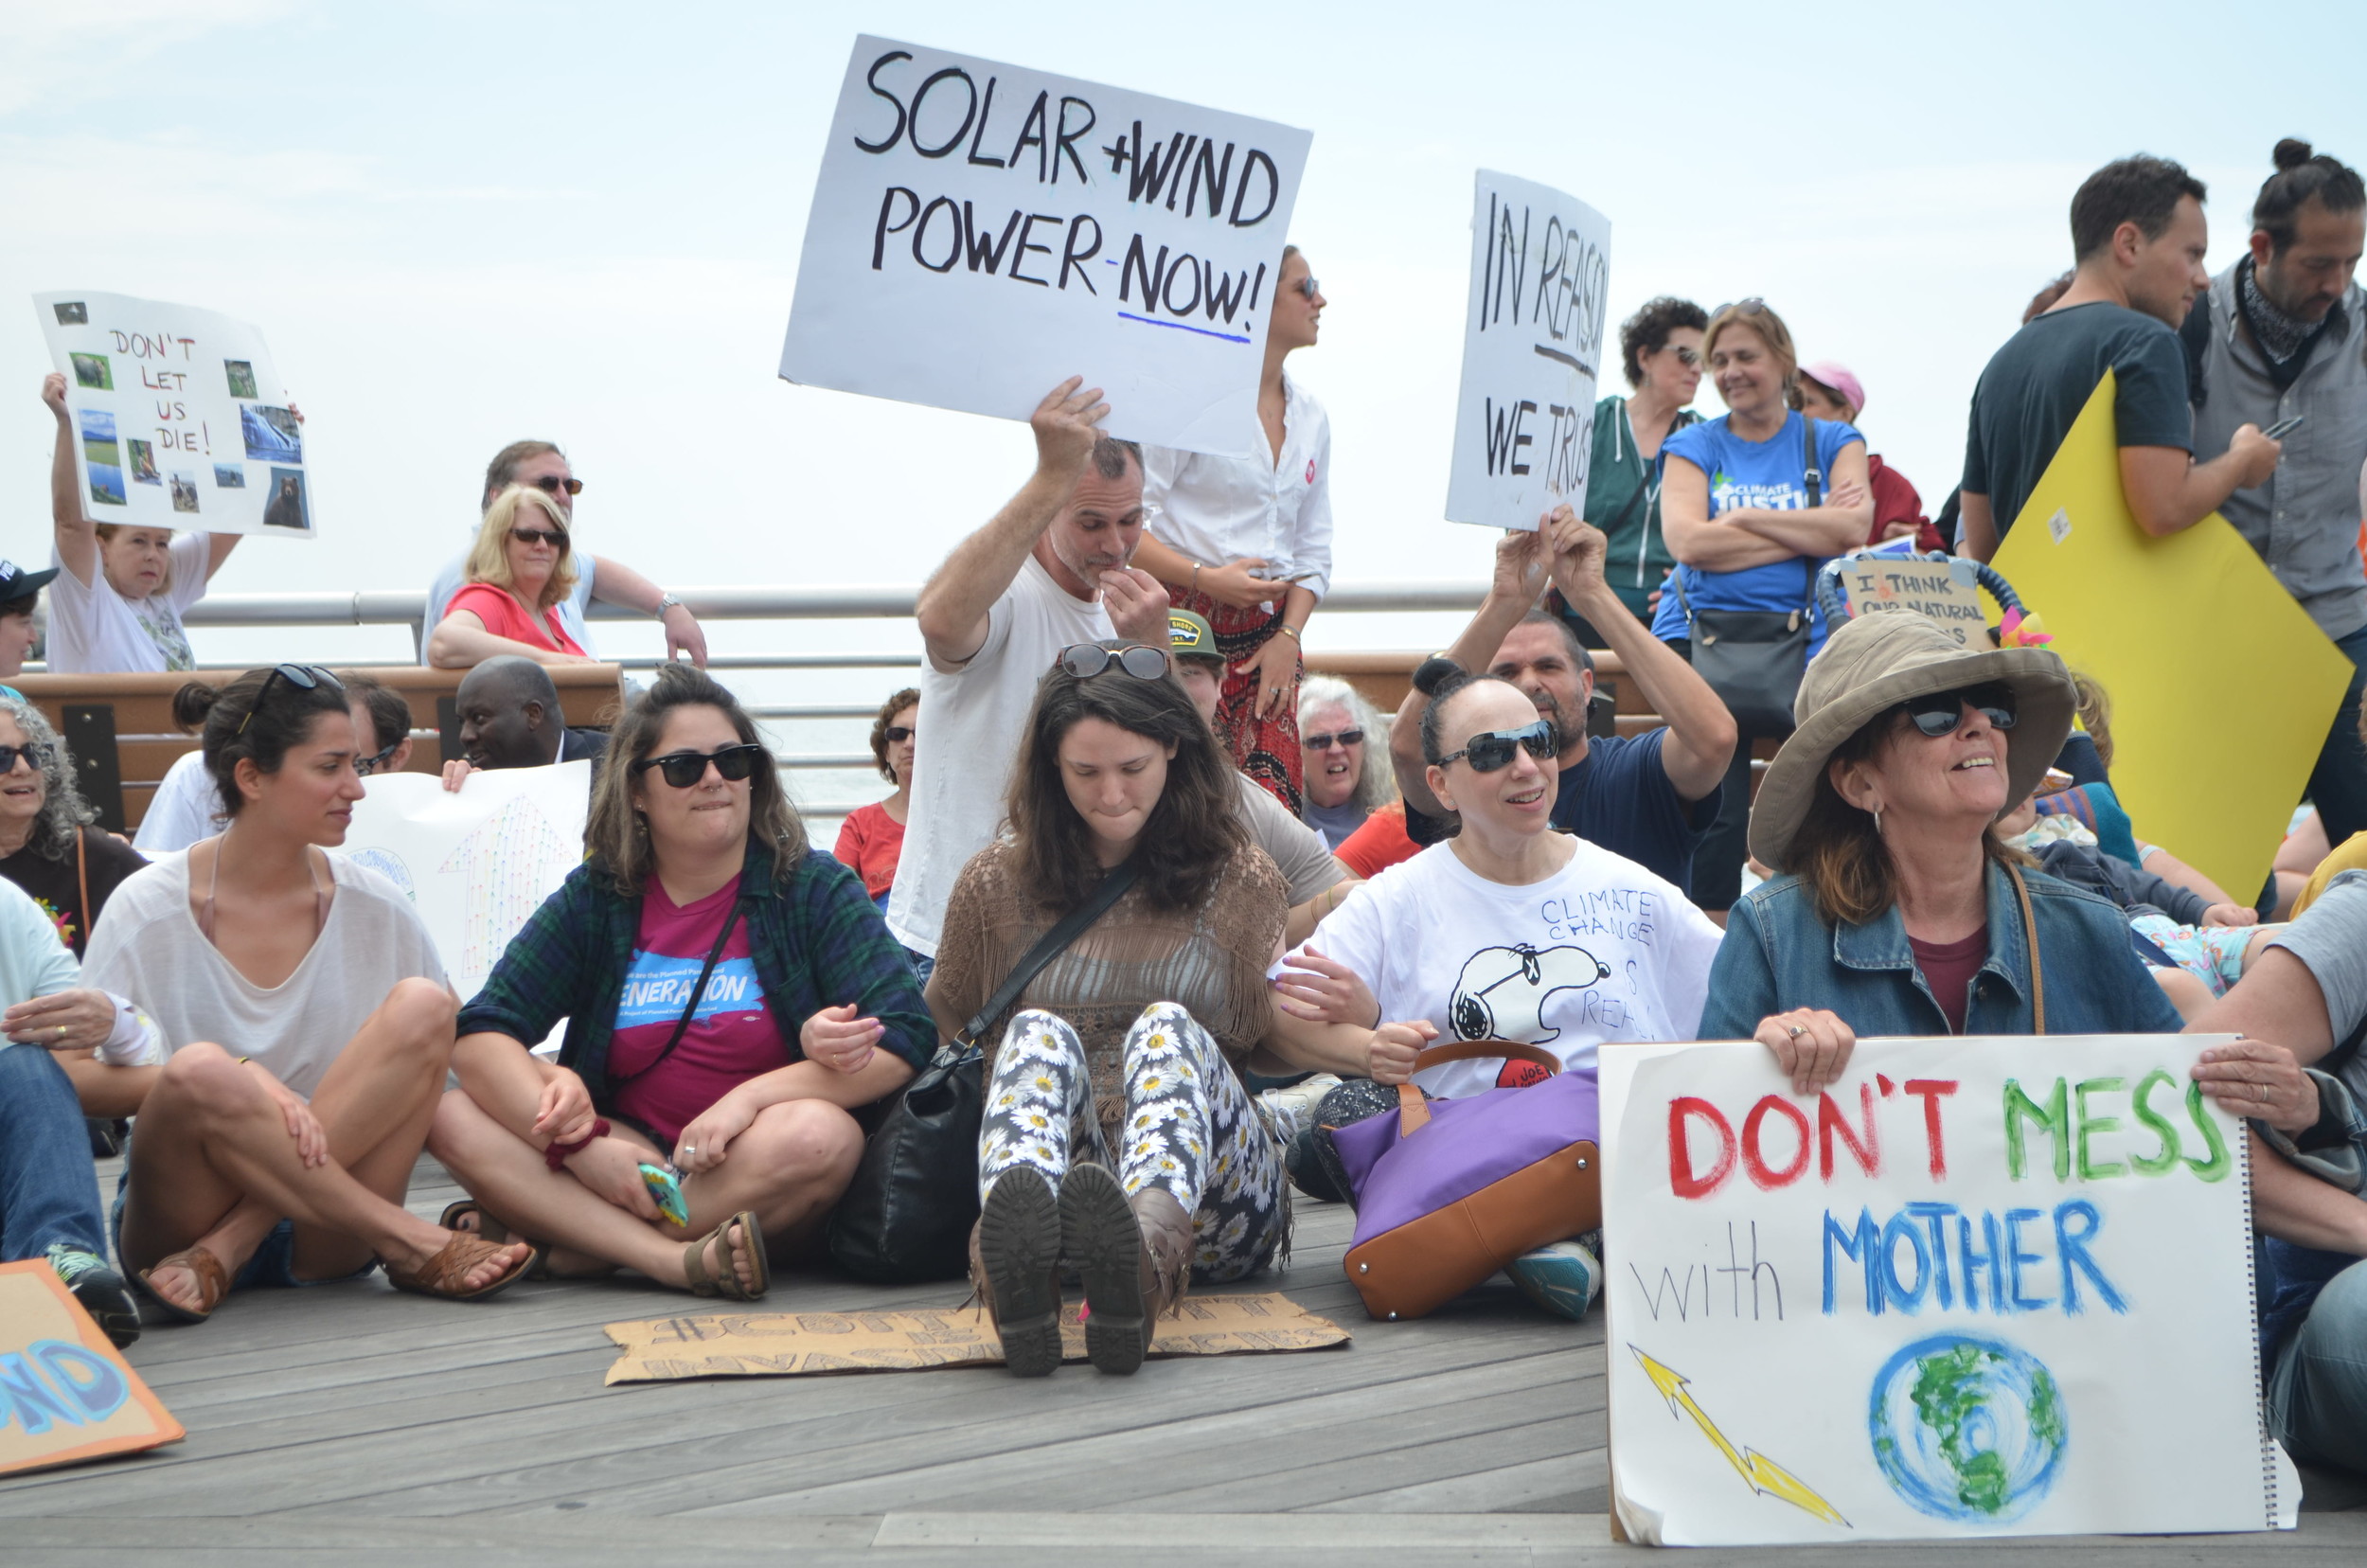 Organizers of the event asked protesters to sit down on the boardwalk, link arms and observe a minute of silence — as did participants in other marches around the country.